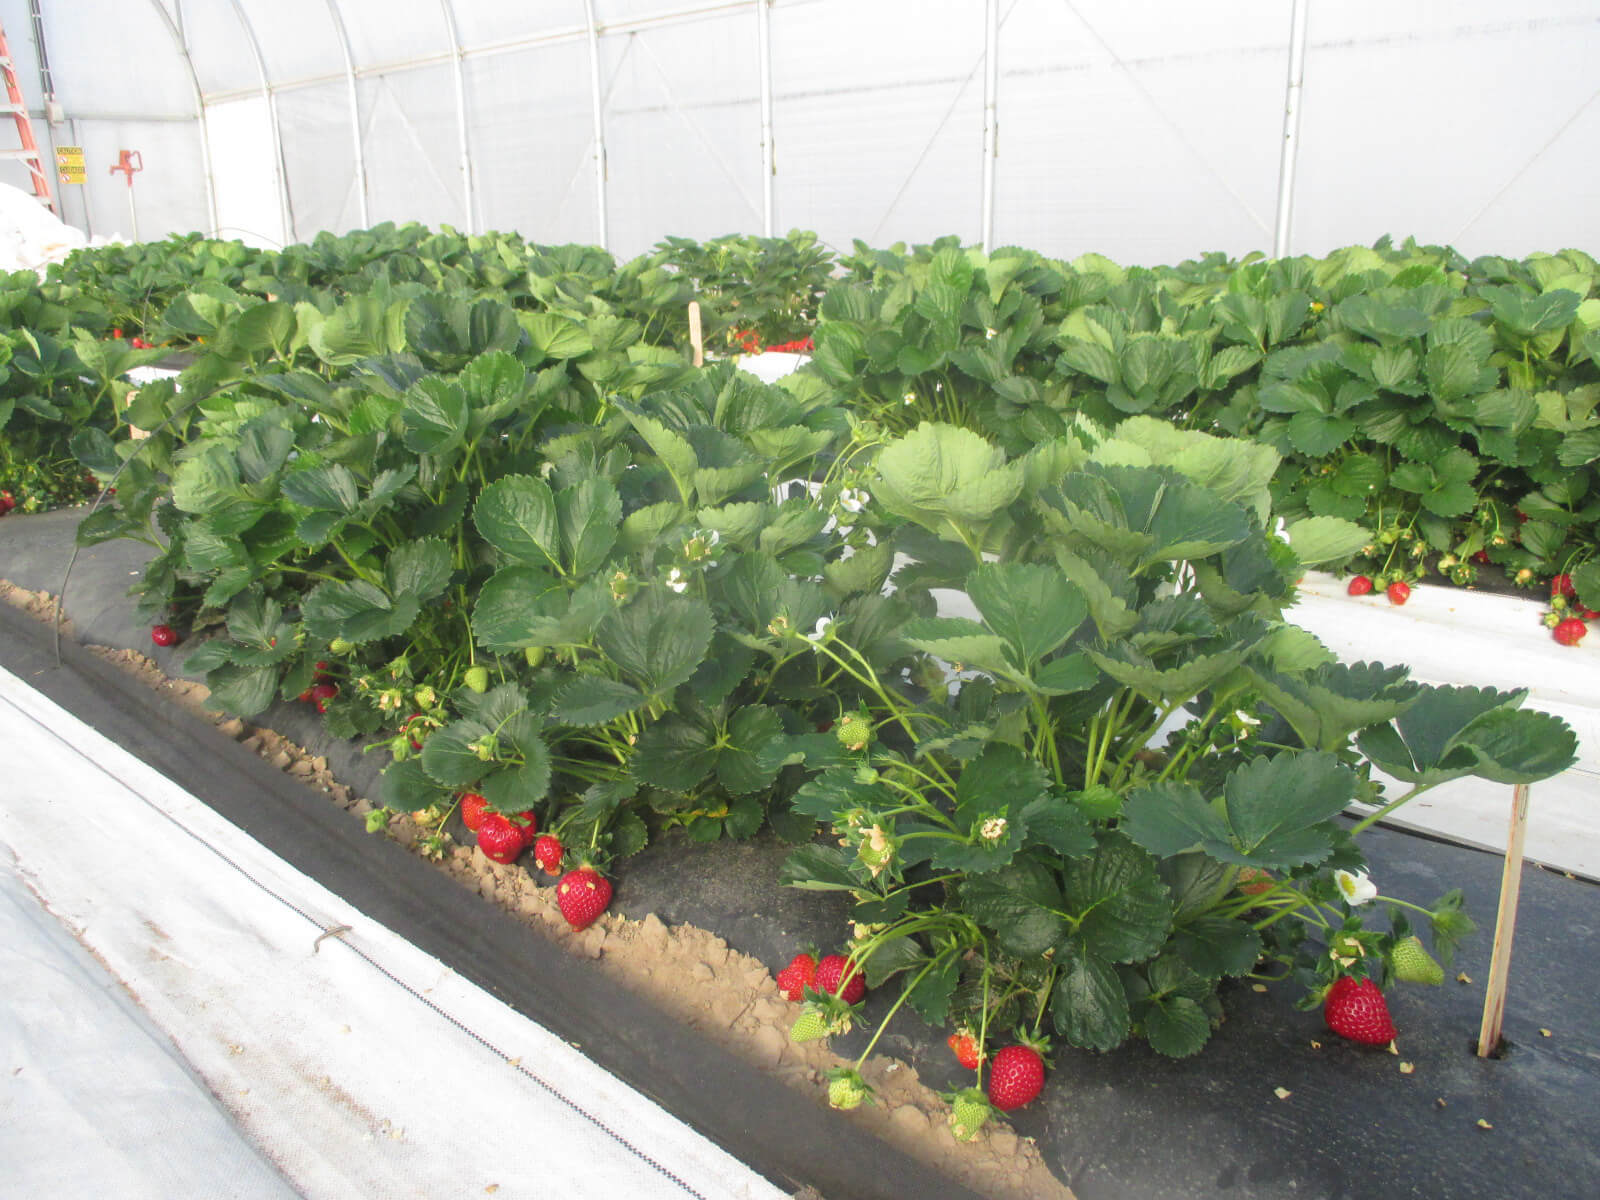 Strawberry plantation in green house